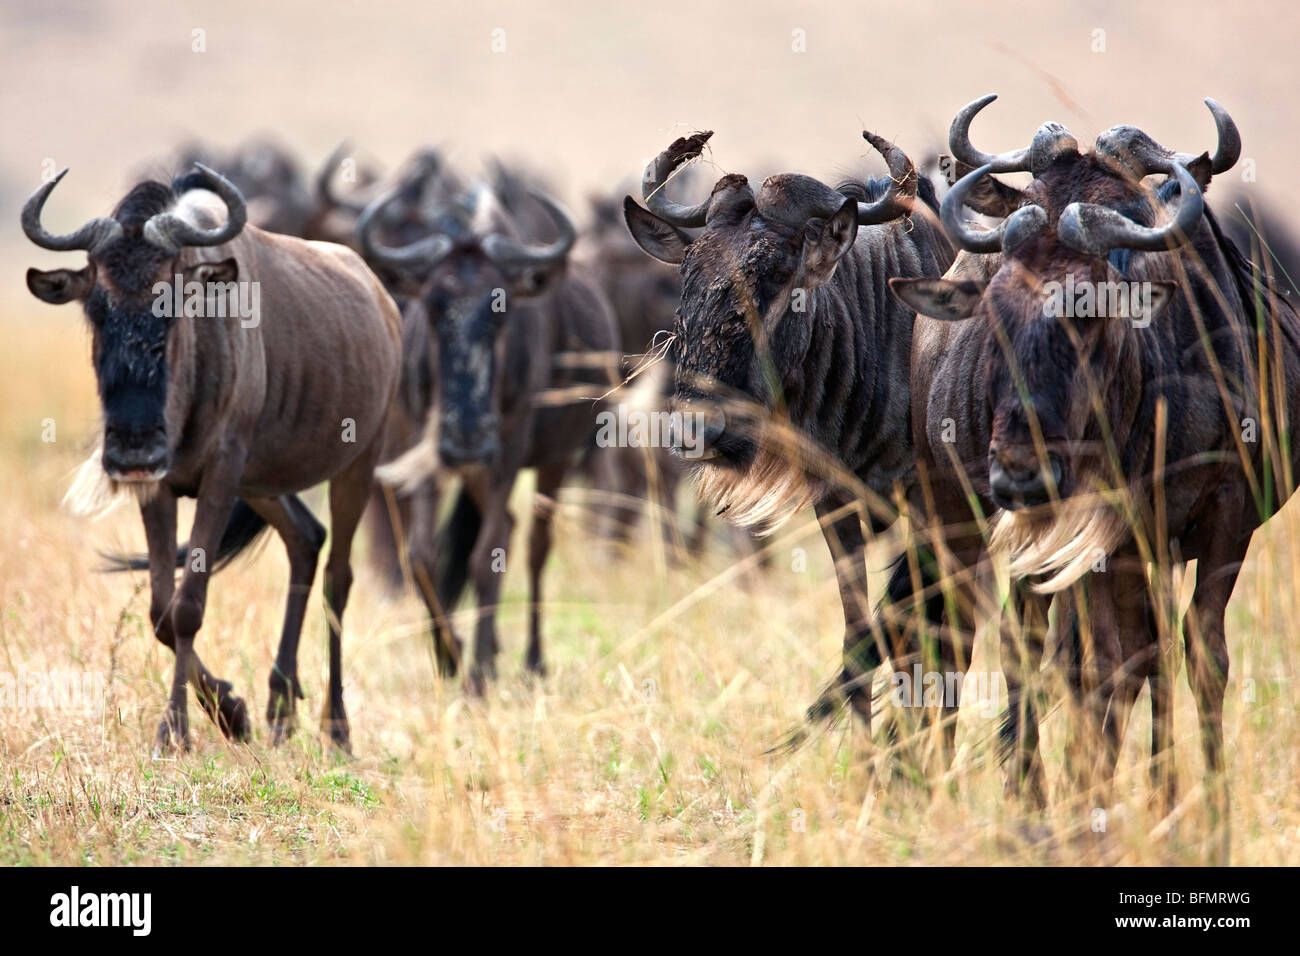 Kenya. White-bearded gnus on the move in Masai Mara National Reserve during their annual migration. Stock Photo